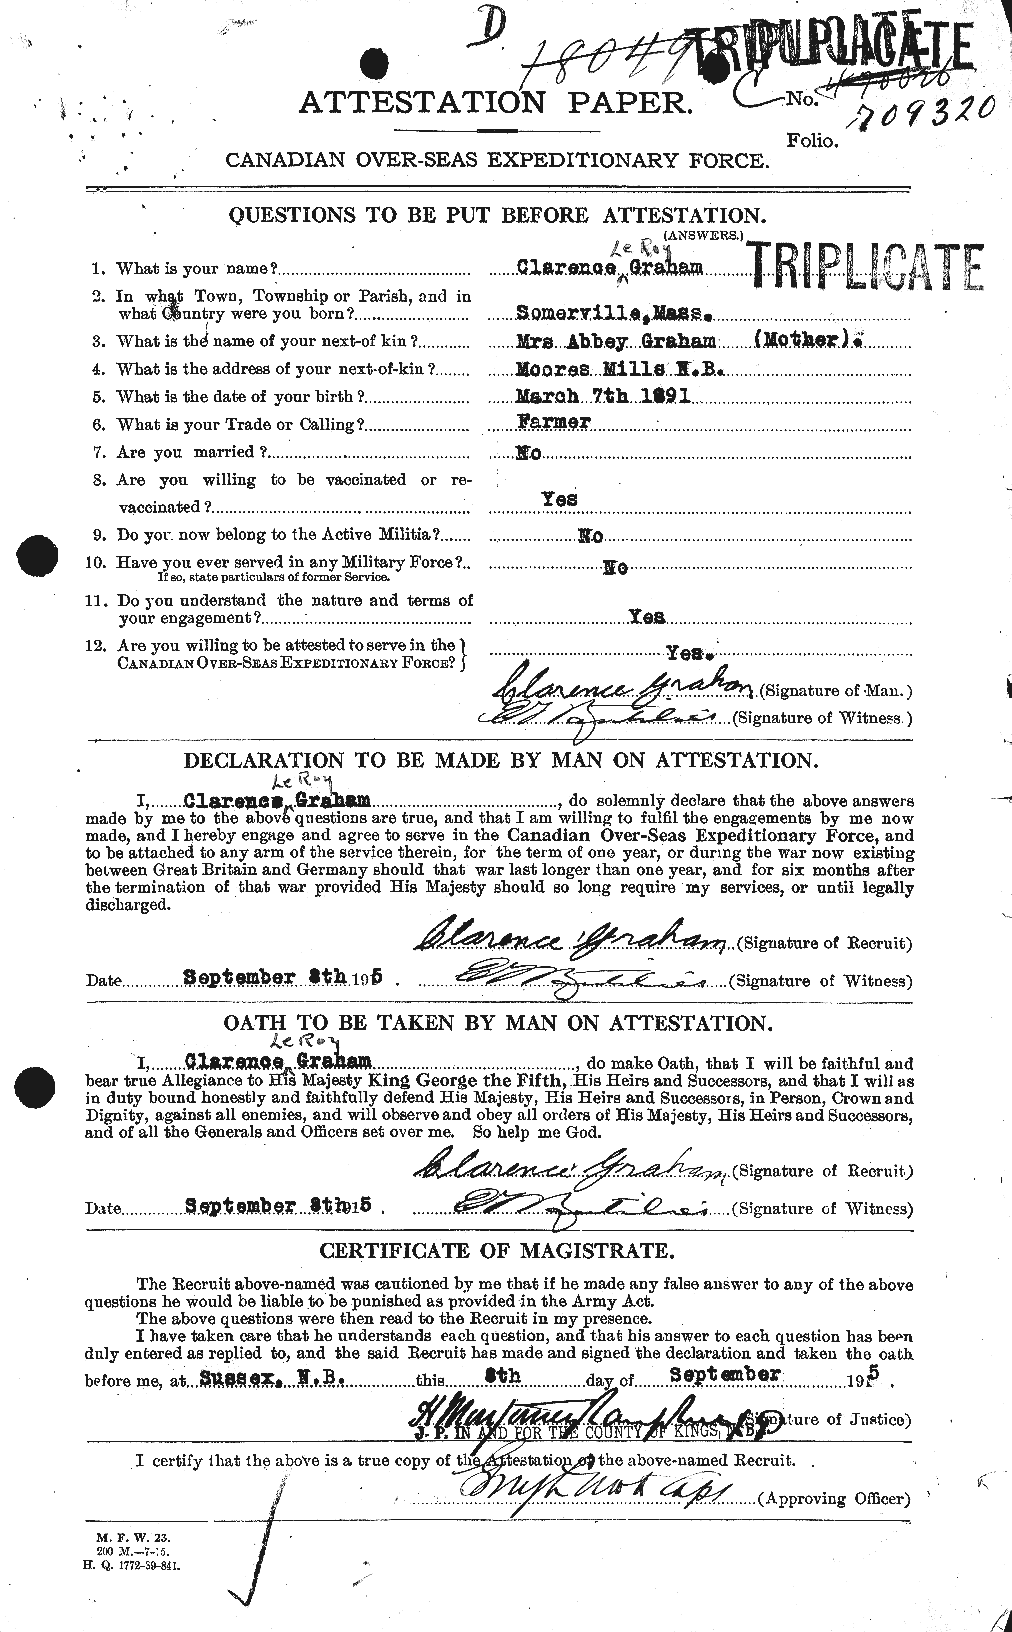 Personnel Records of the First World War - CEF 353796a